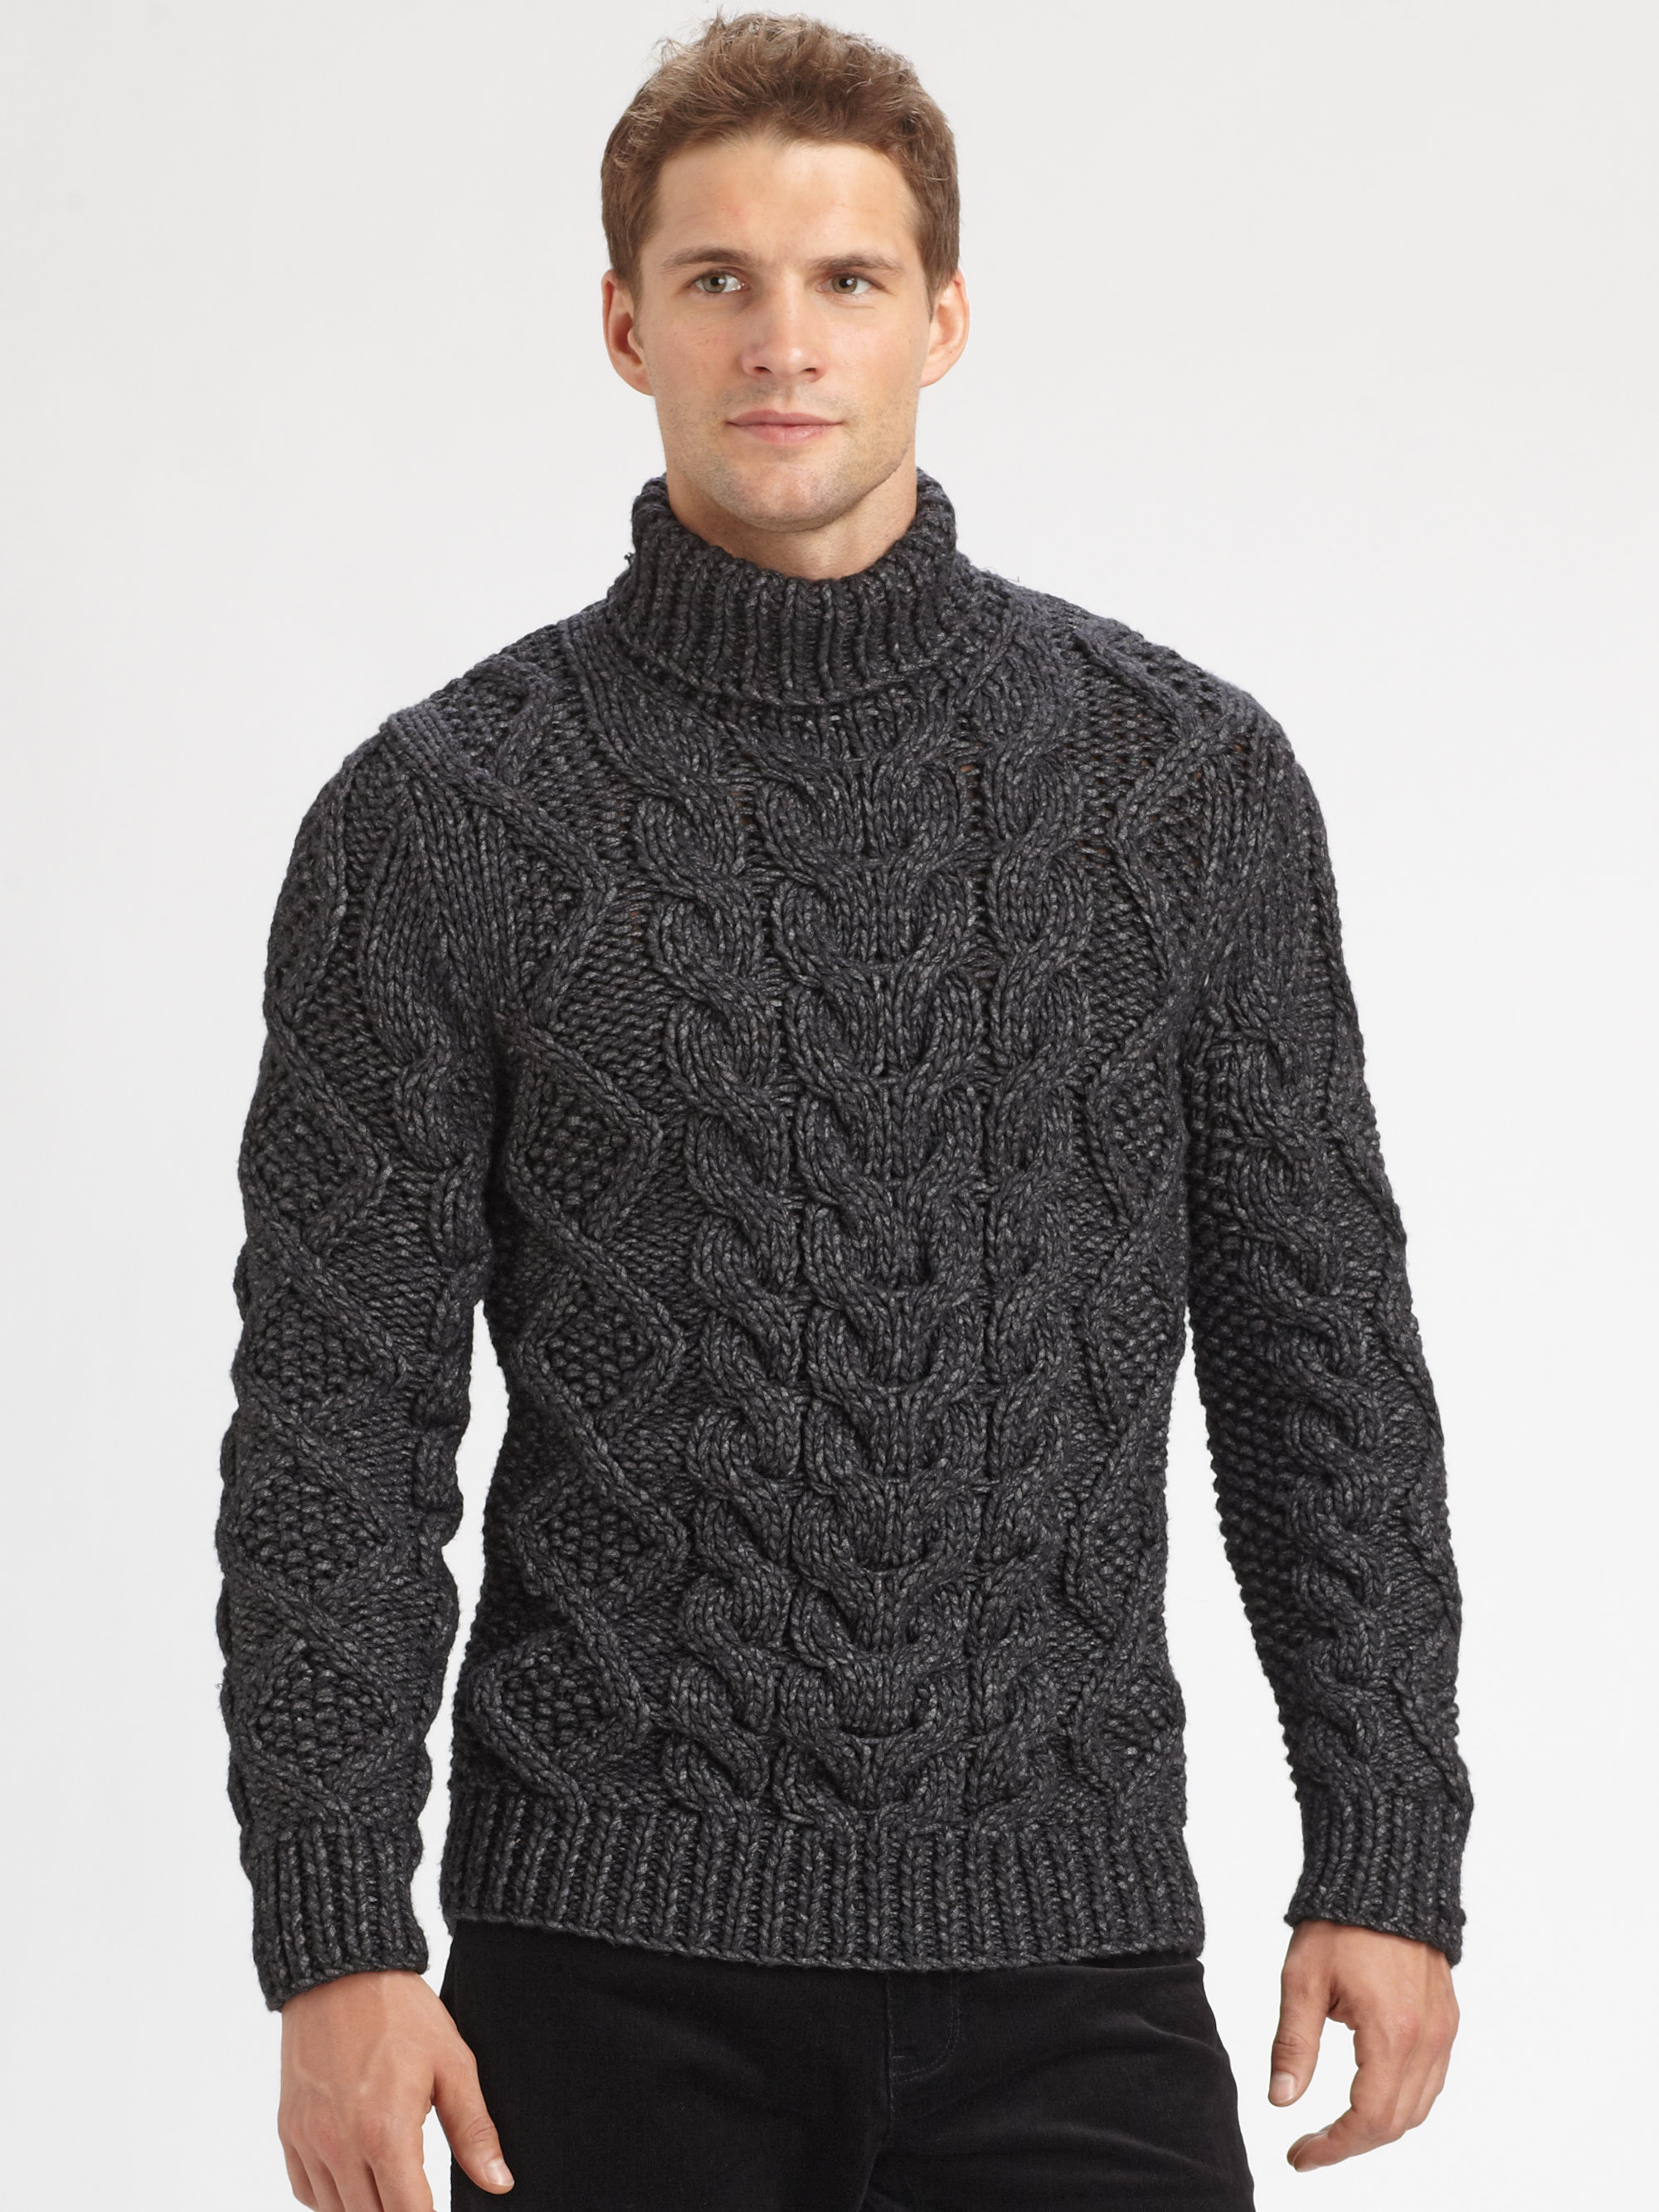 Lyst - Michael Kors Cable Turtleneck in Gray for Men